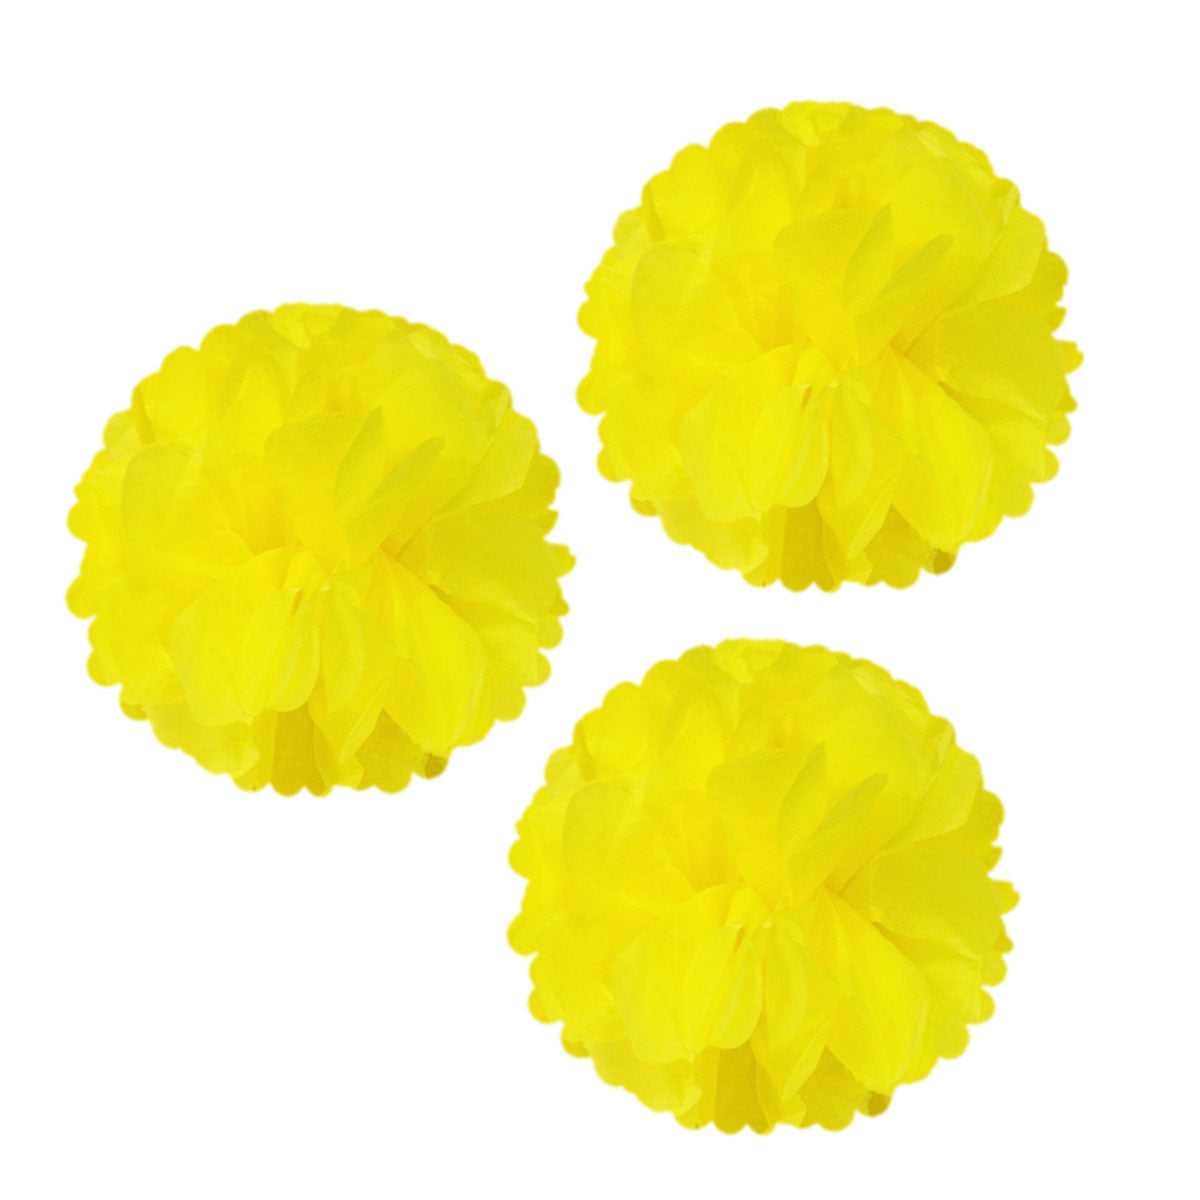 Wrapables 12 inch Set of 3 Tissue Pom Poms Party Decorations for Weddings, Birthday Parties Baby Showers and Nursery Dcor, Yellow